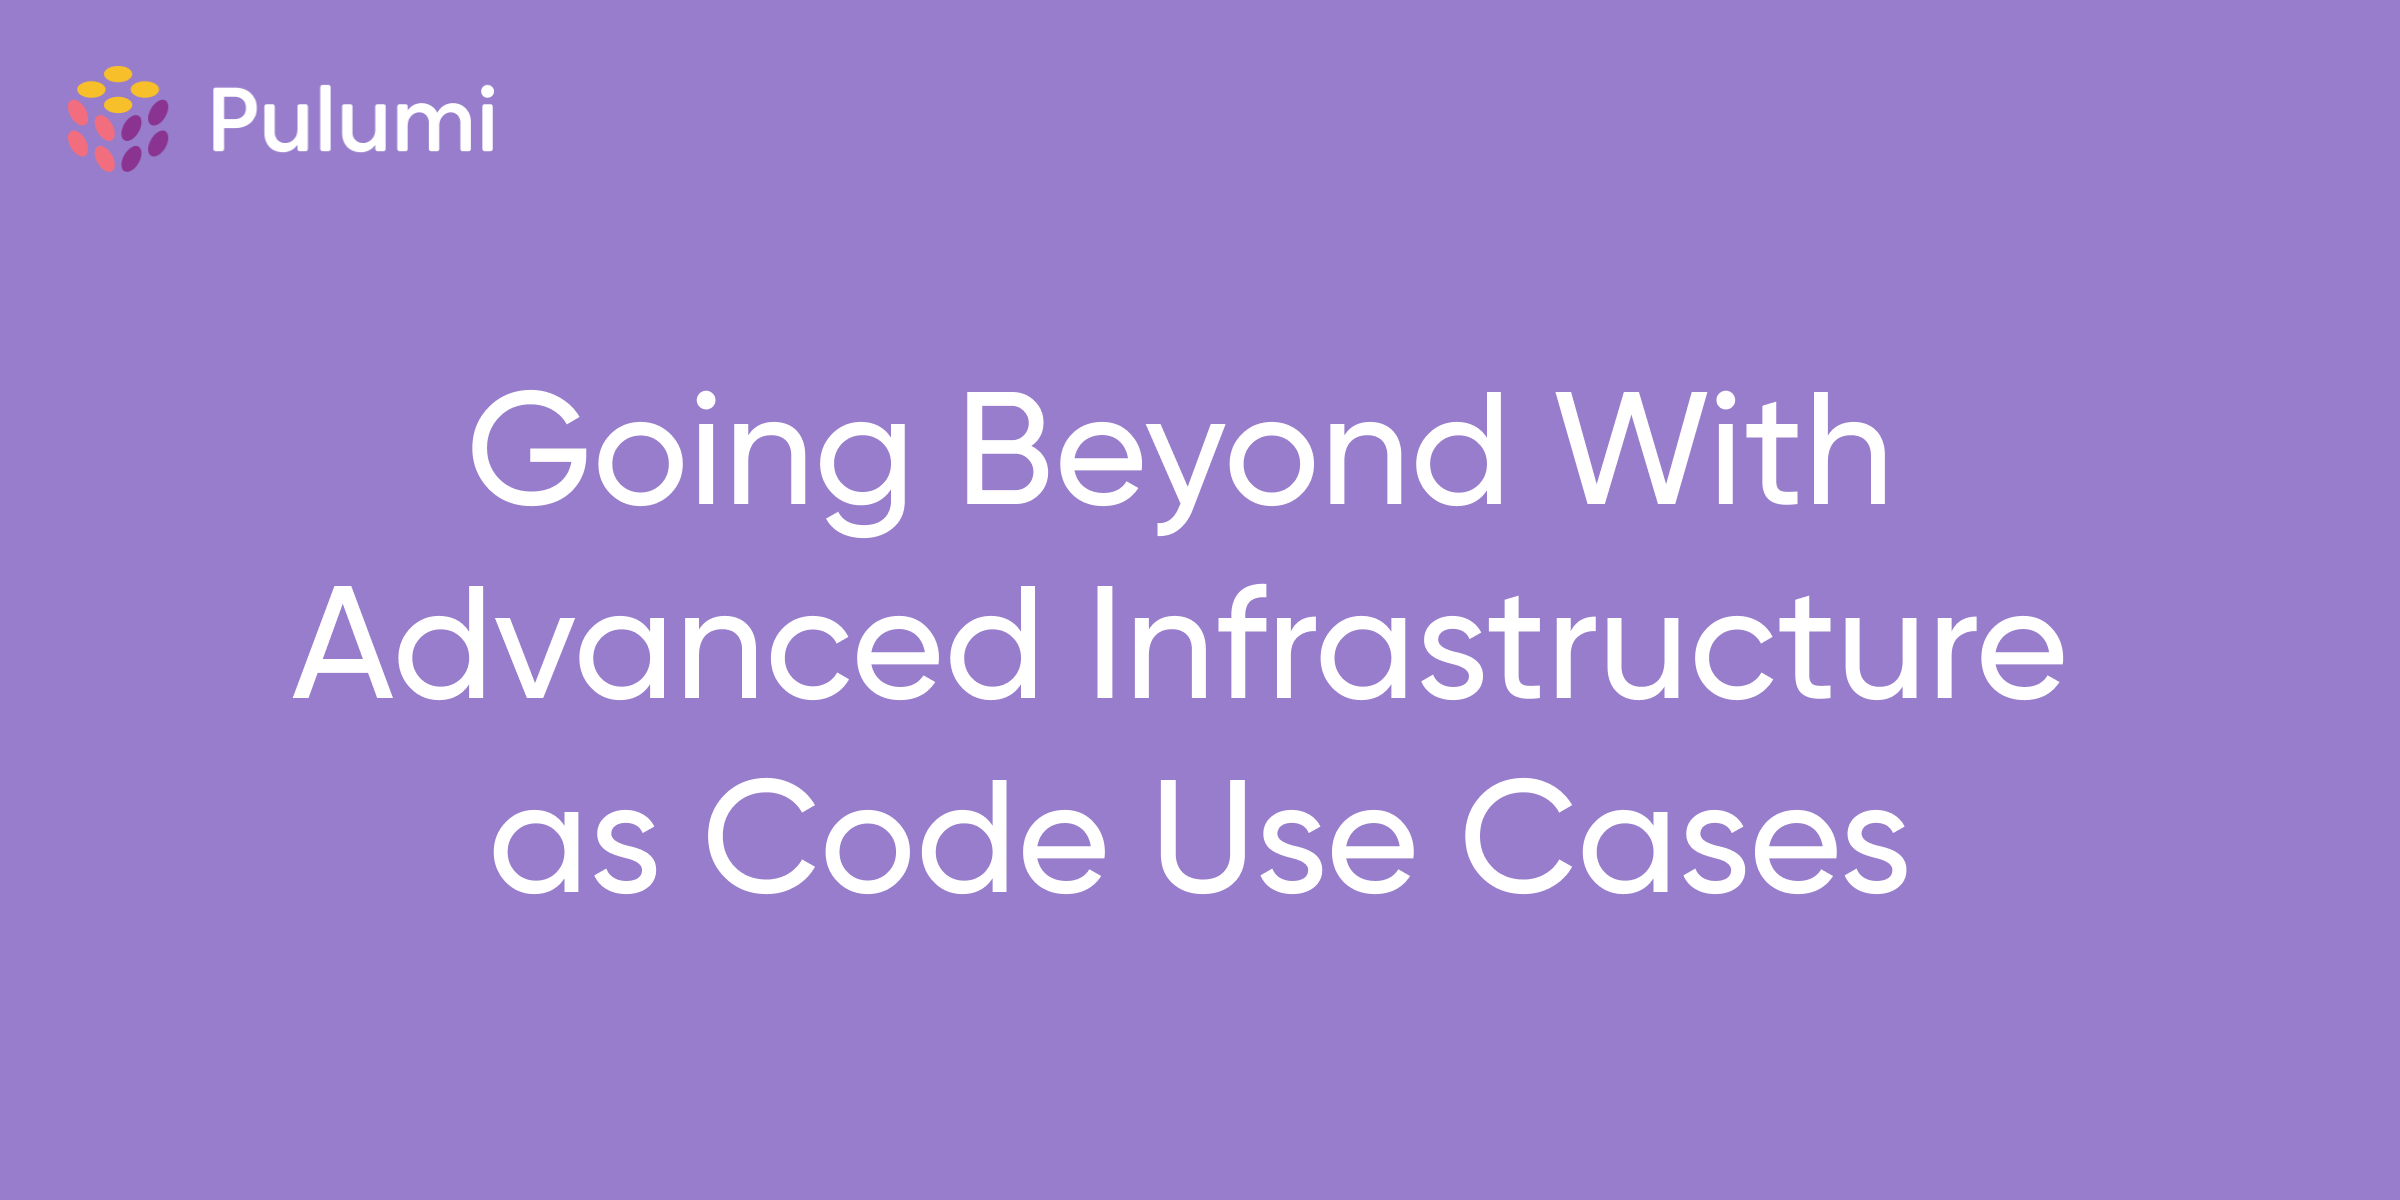 Going Beyond With Advanced Infrastructure as Code Use Cases